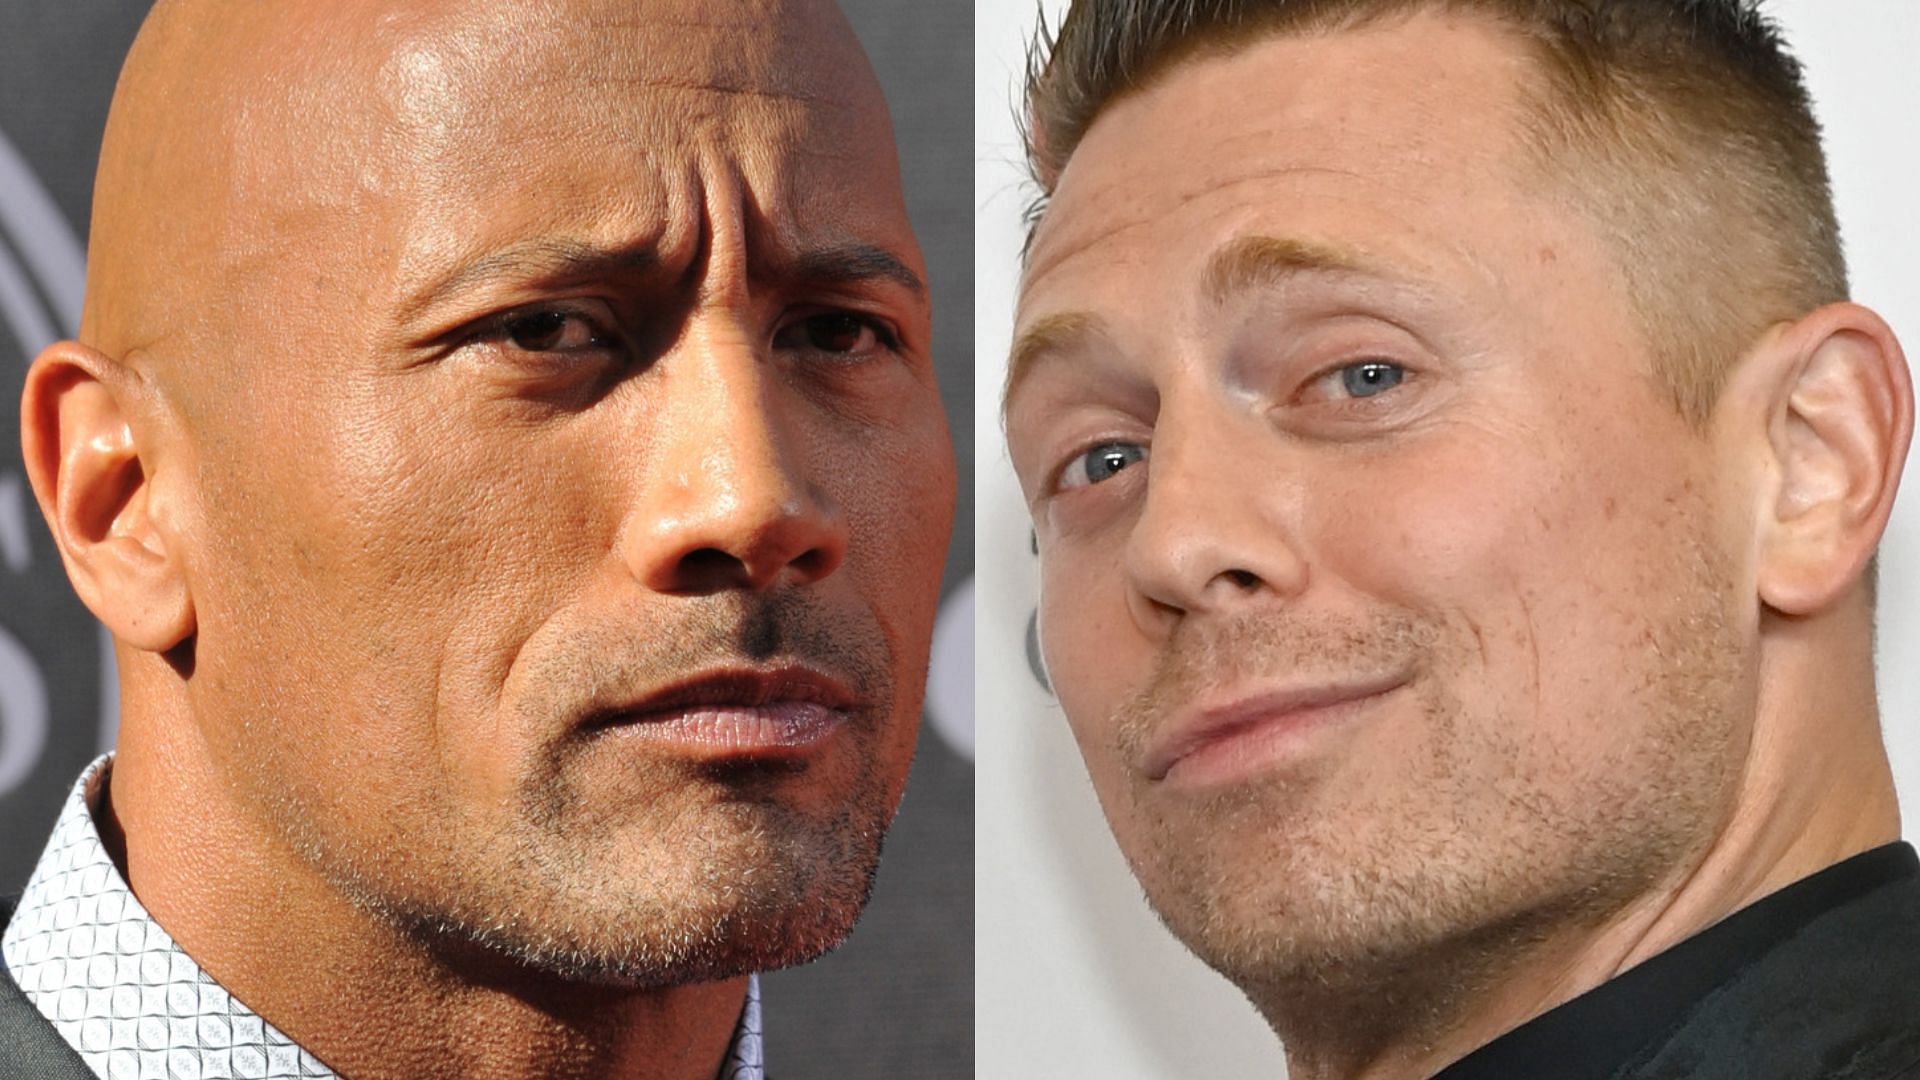 The Rock and The Miz are two WWE Superstars who have had prosperous careers both inside and outside the squared circle.